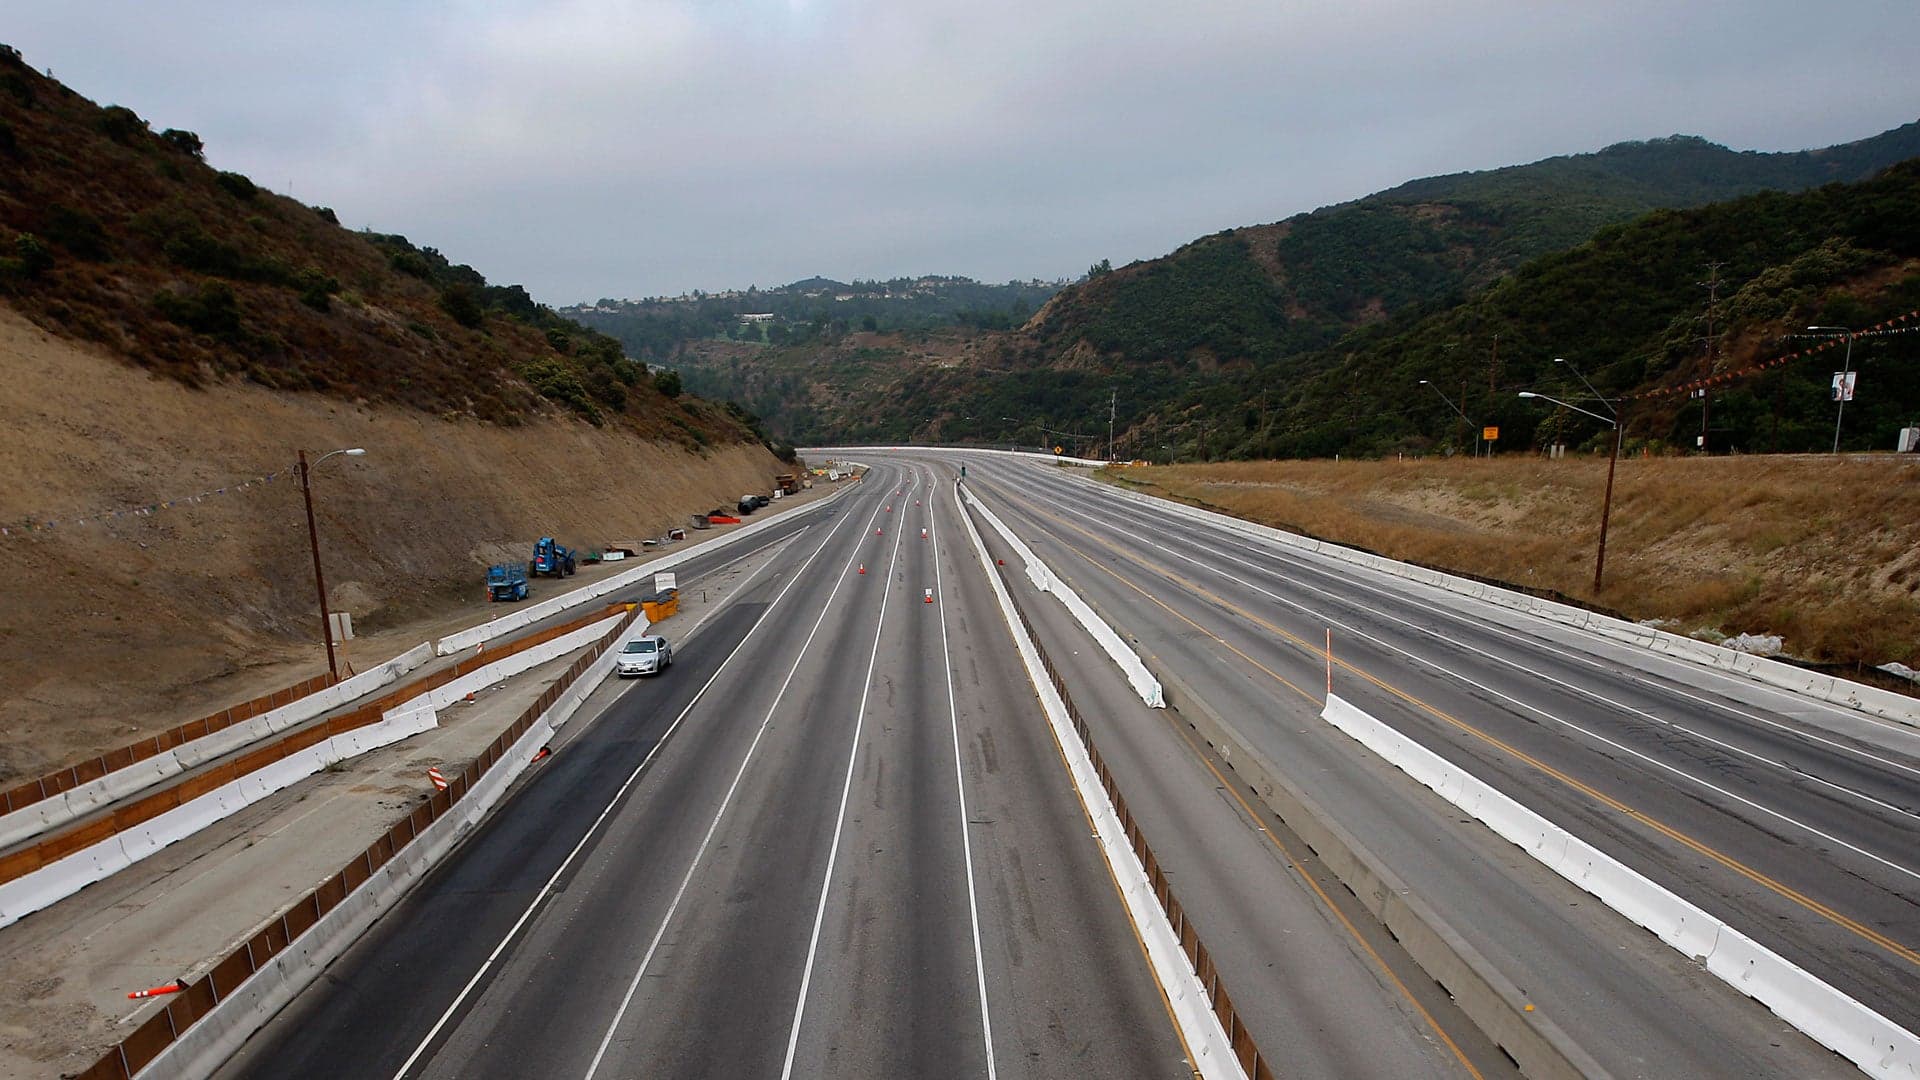 What Would You Do With a Closed Freeway?